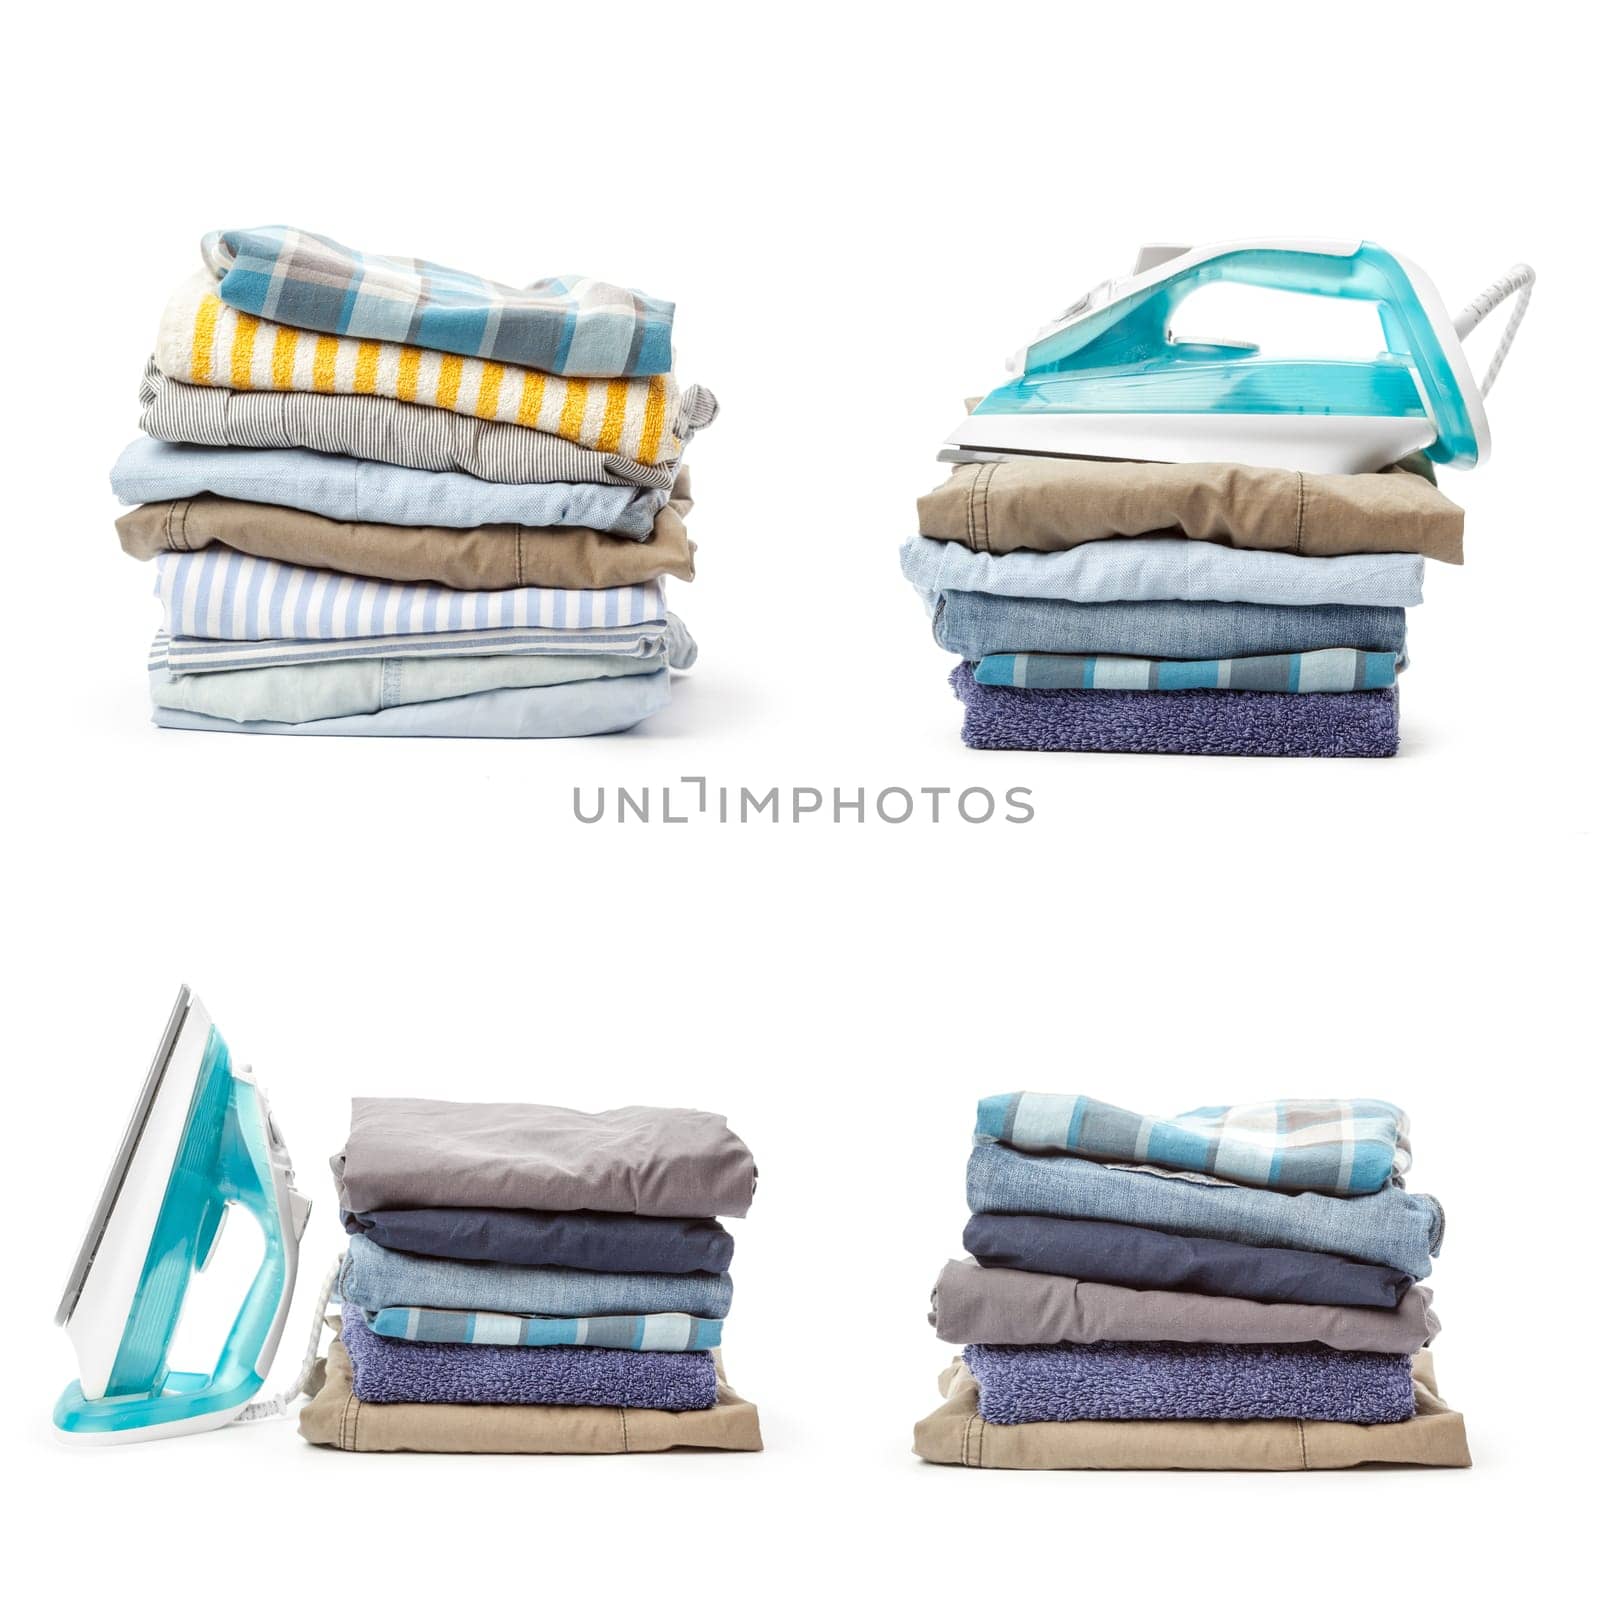 stacks of clothing collection isolated on white